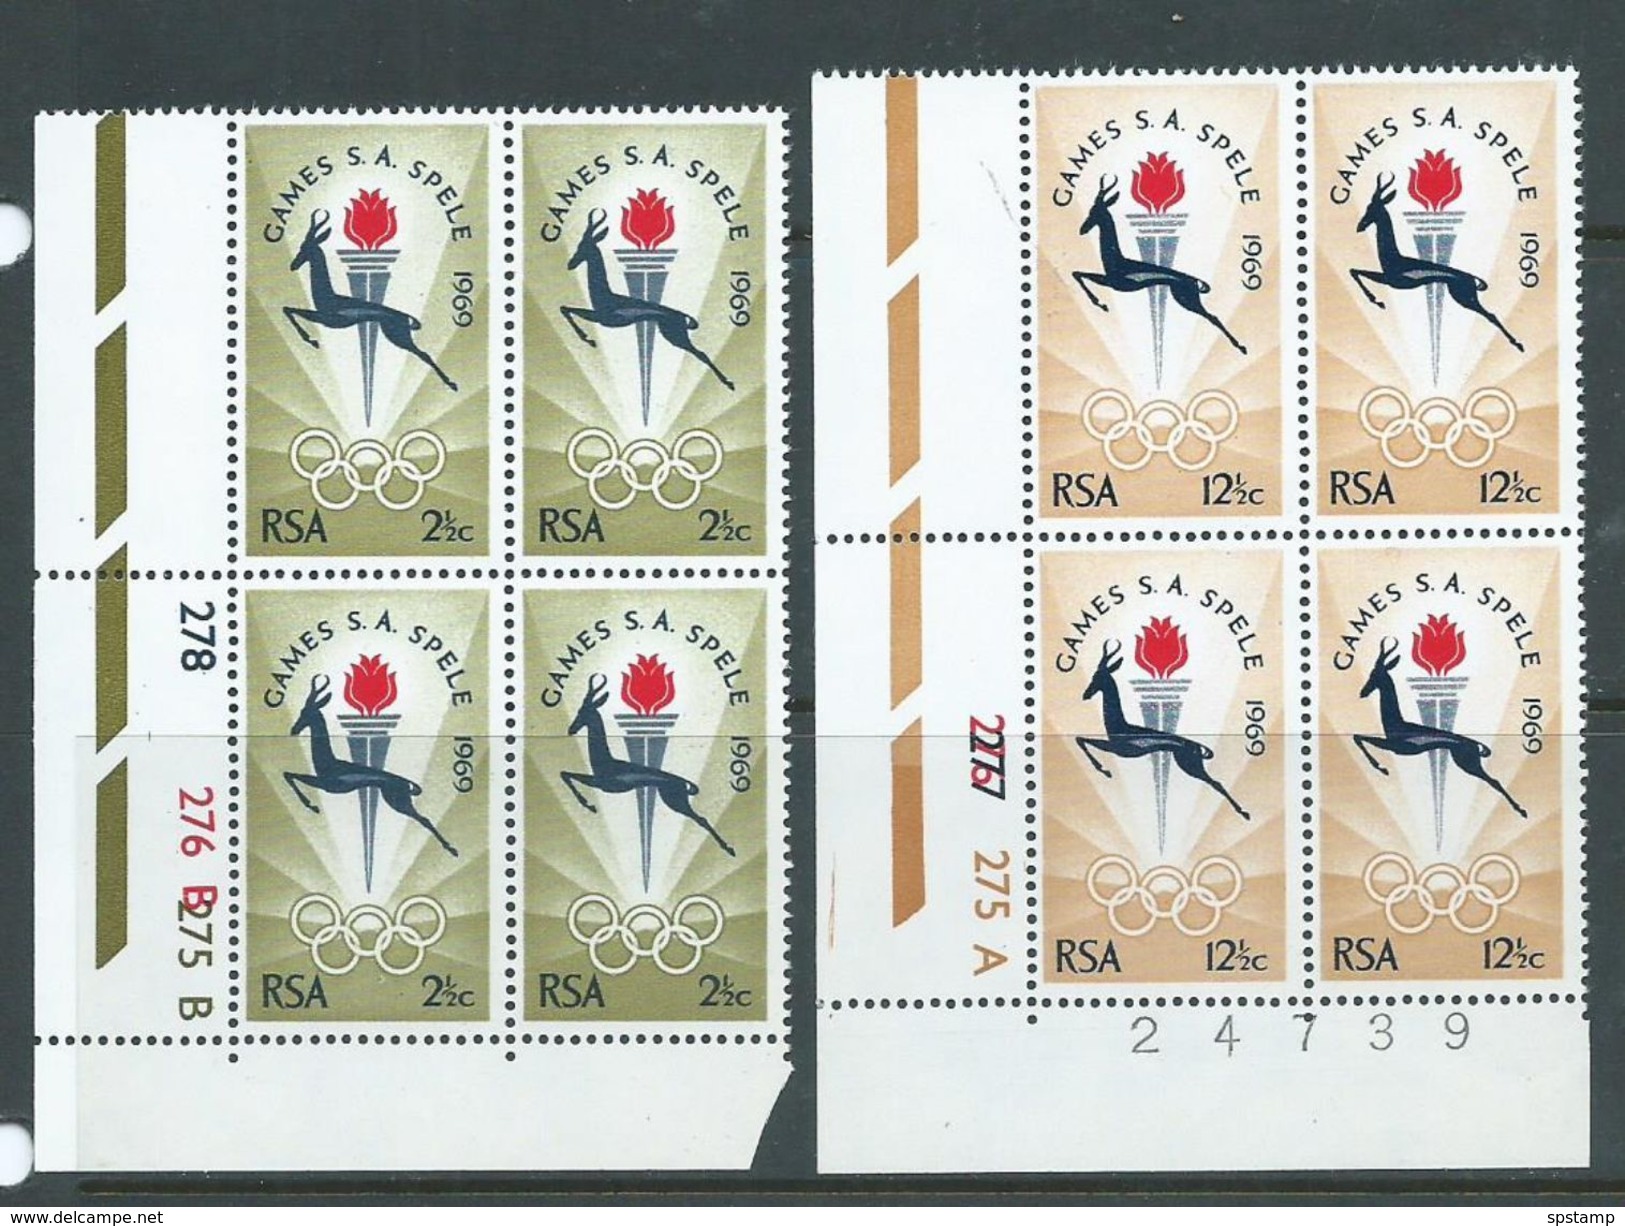 South Africa 1969 S African Games Set 2 MNH Positional Blocks Of 4 - Unused Stamps